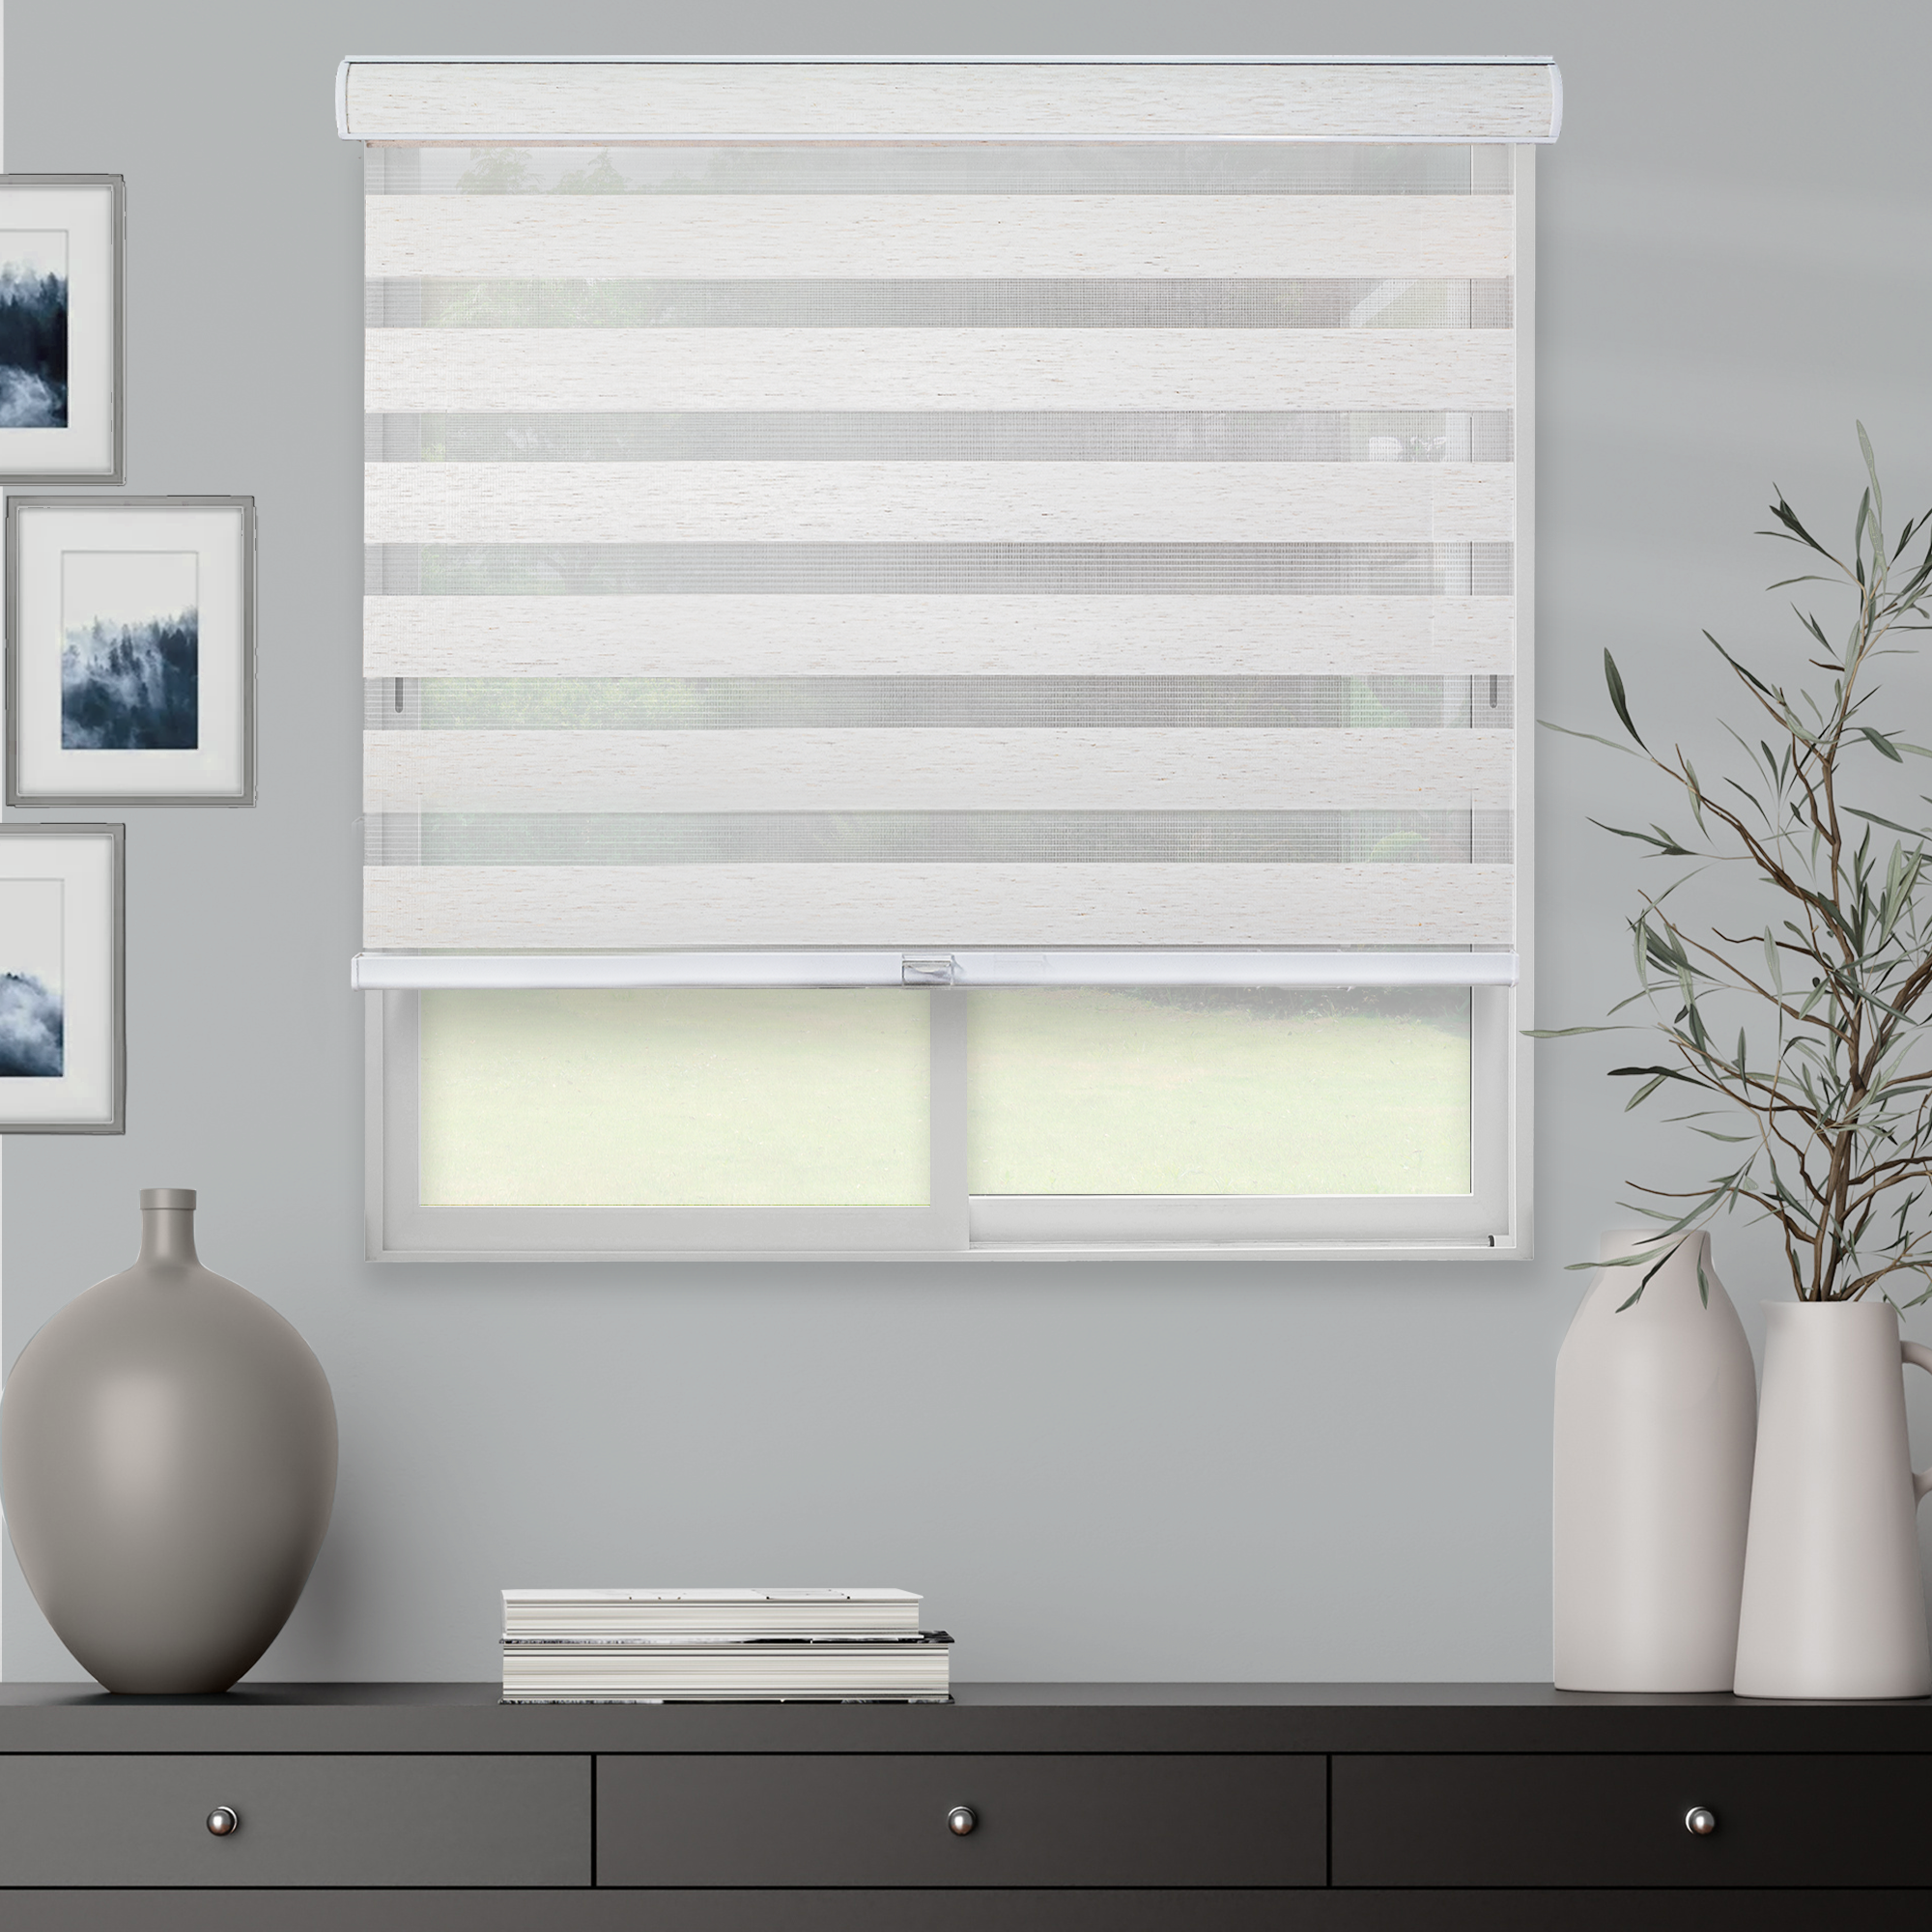 Day and Night Blinds, Protect Your Privacy